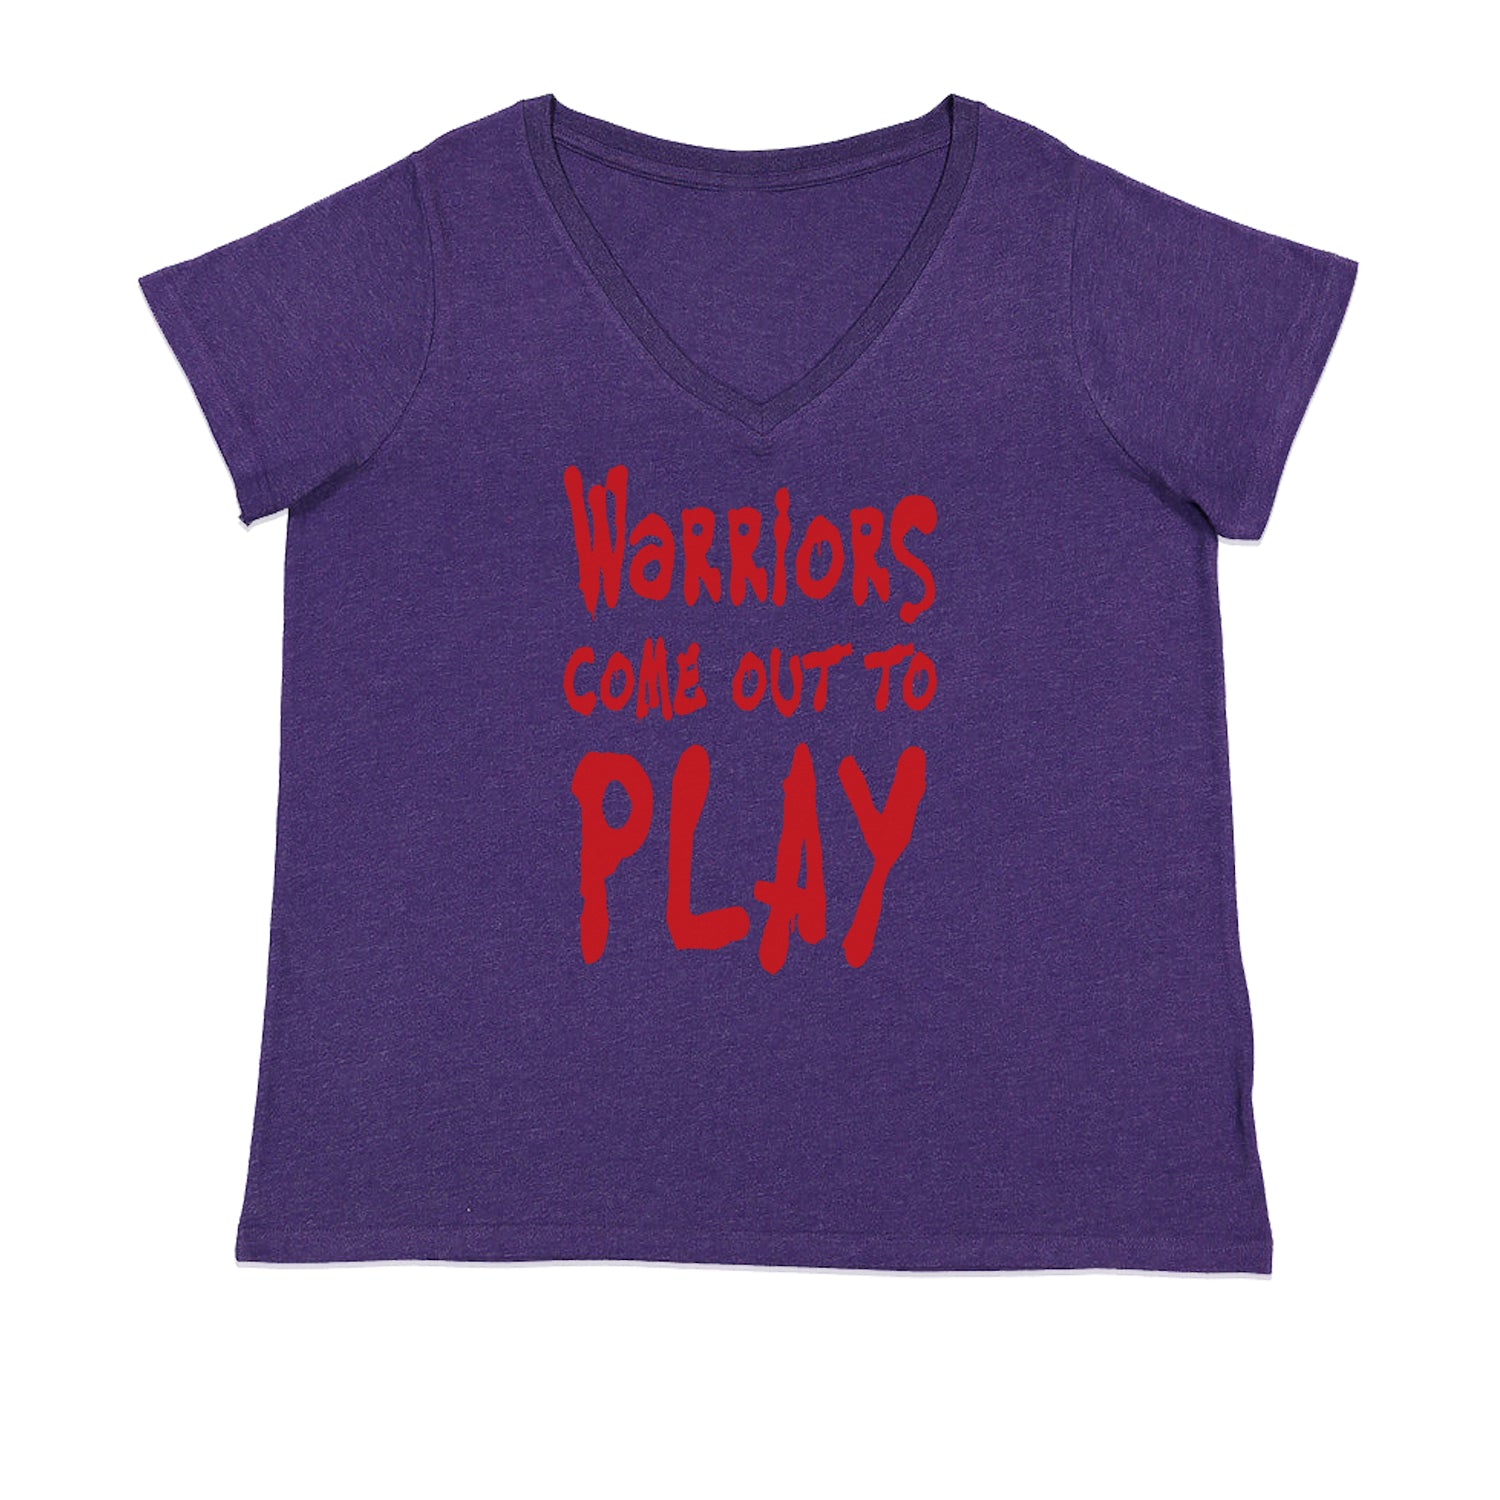 Warriors Come Out To Play  Ladies V-Neck T-shirt Purple